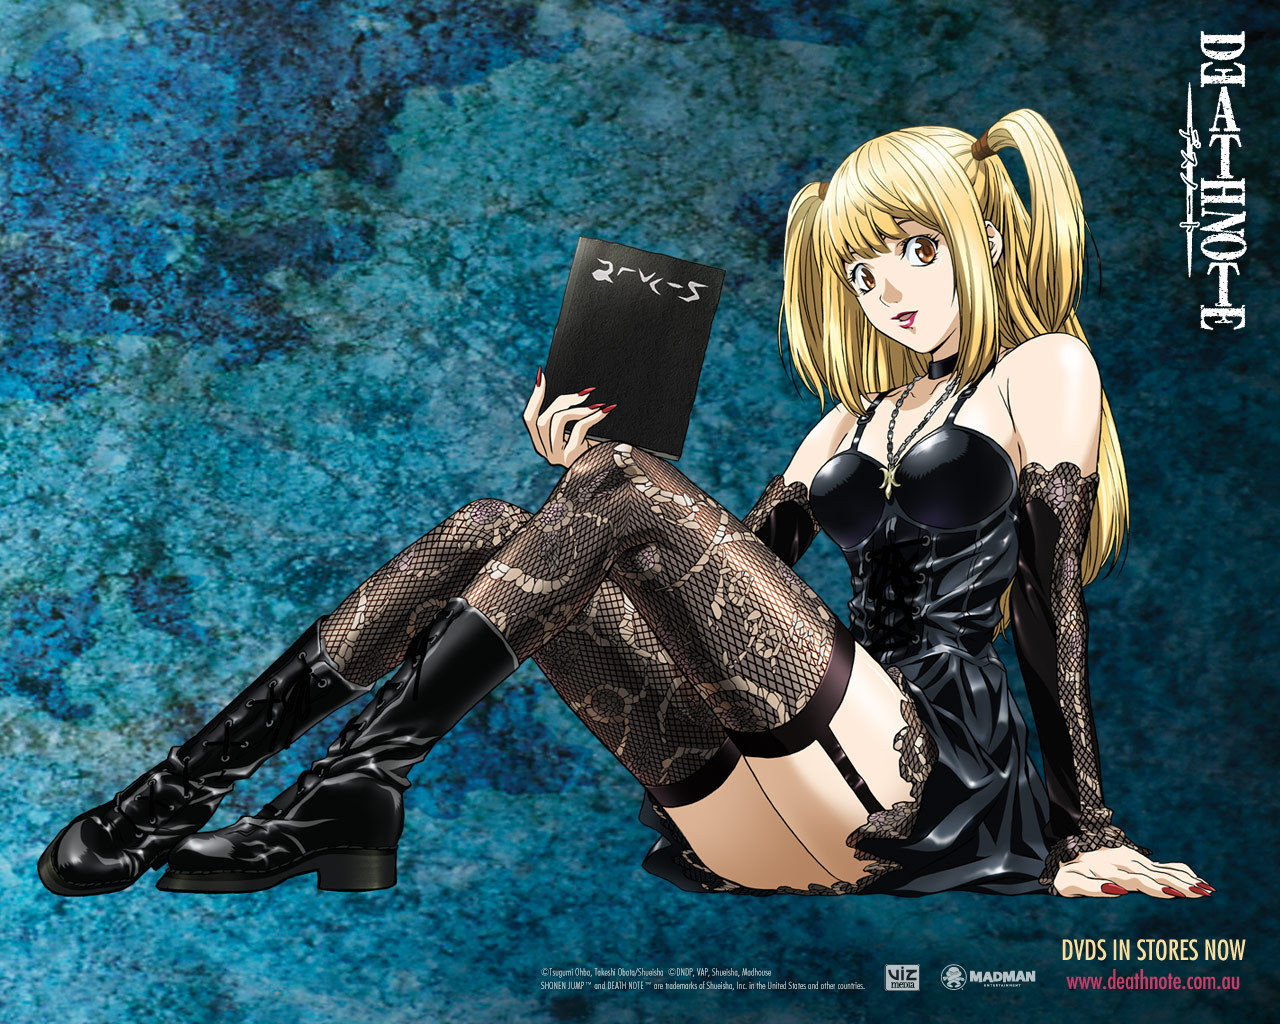 2. Misa Amane from Death Note - wide 5